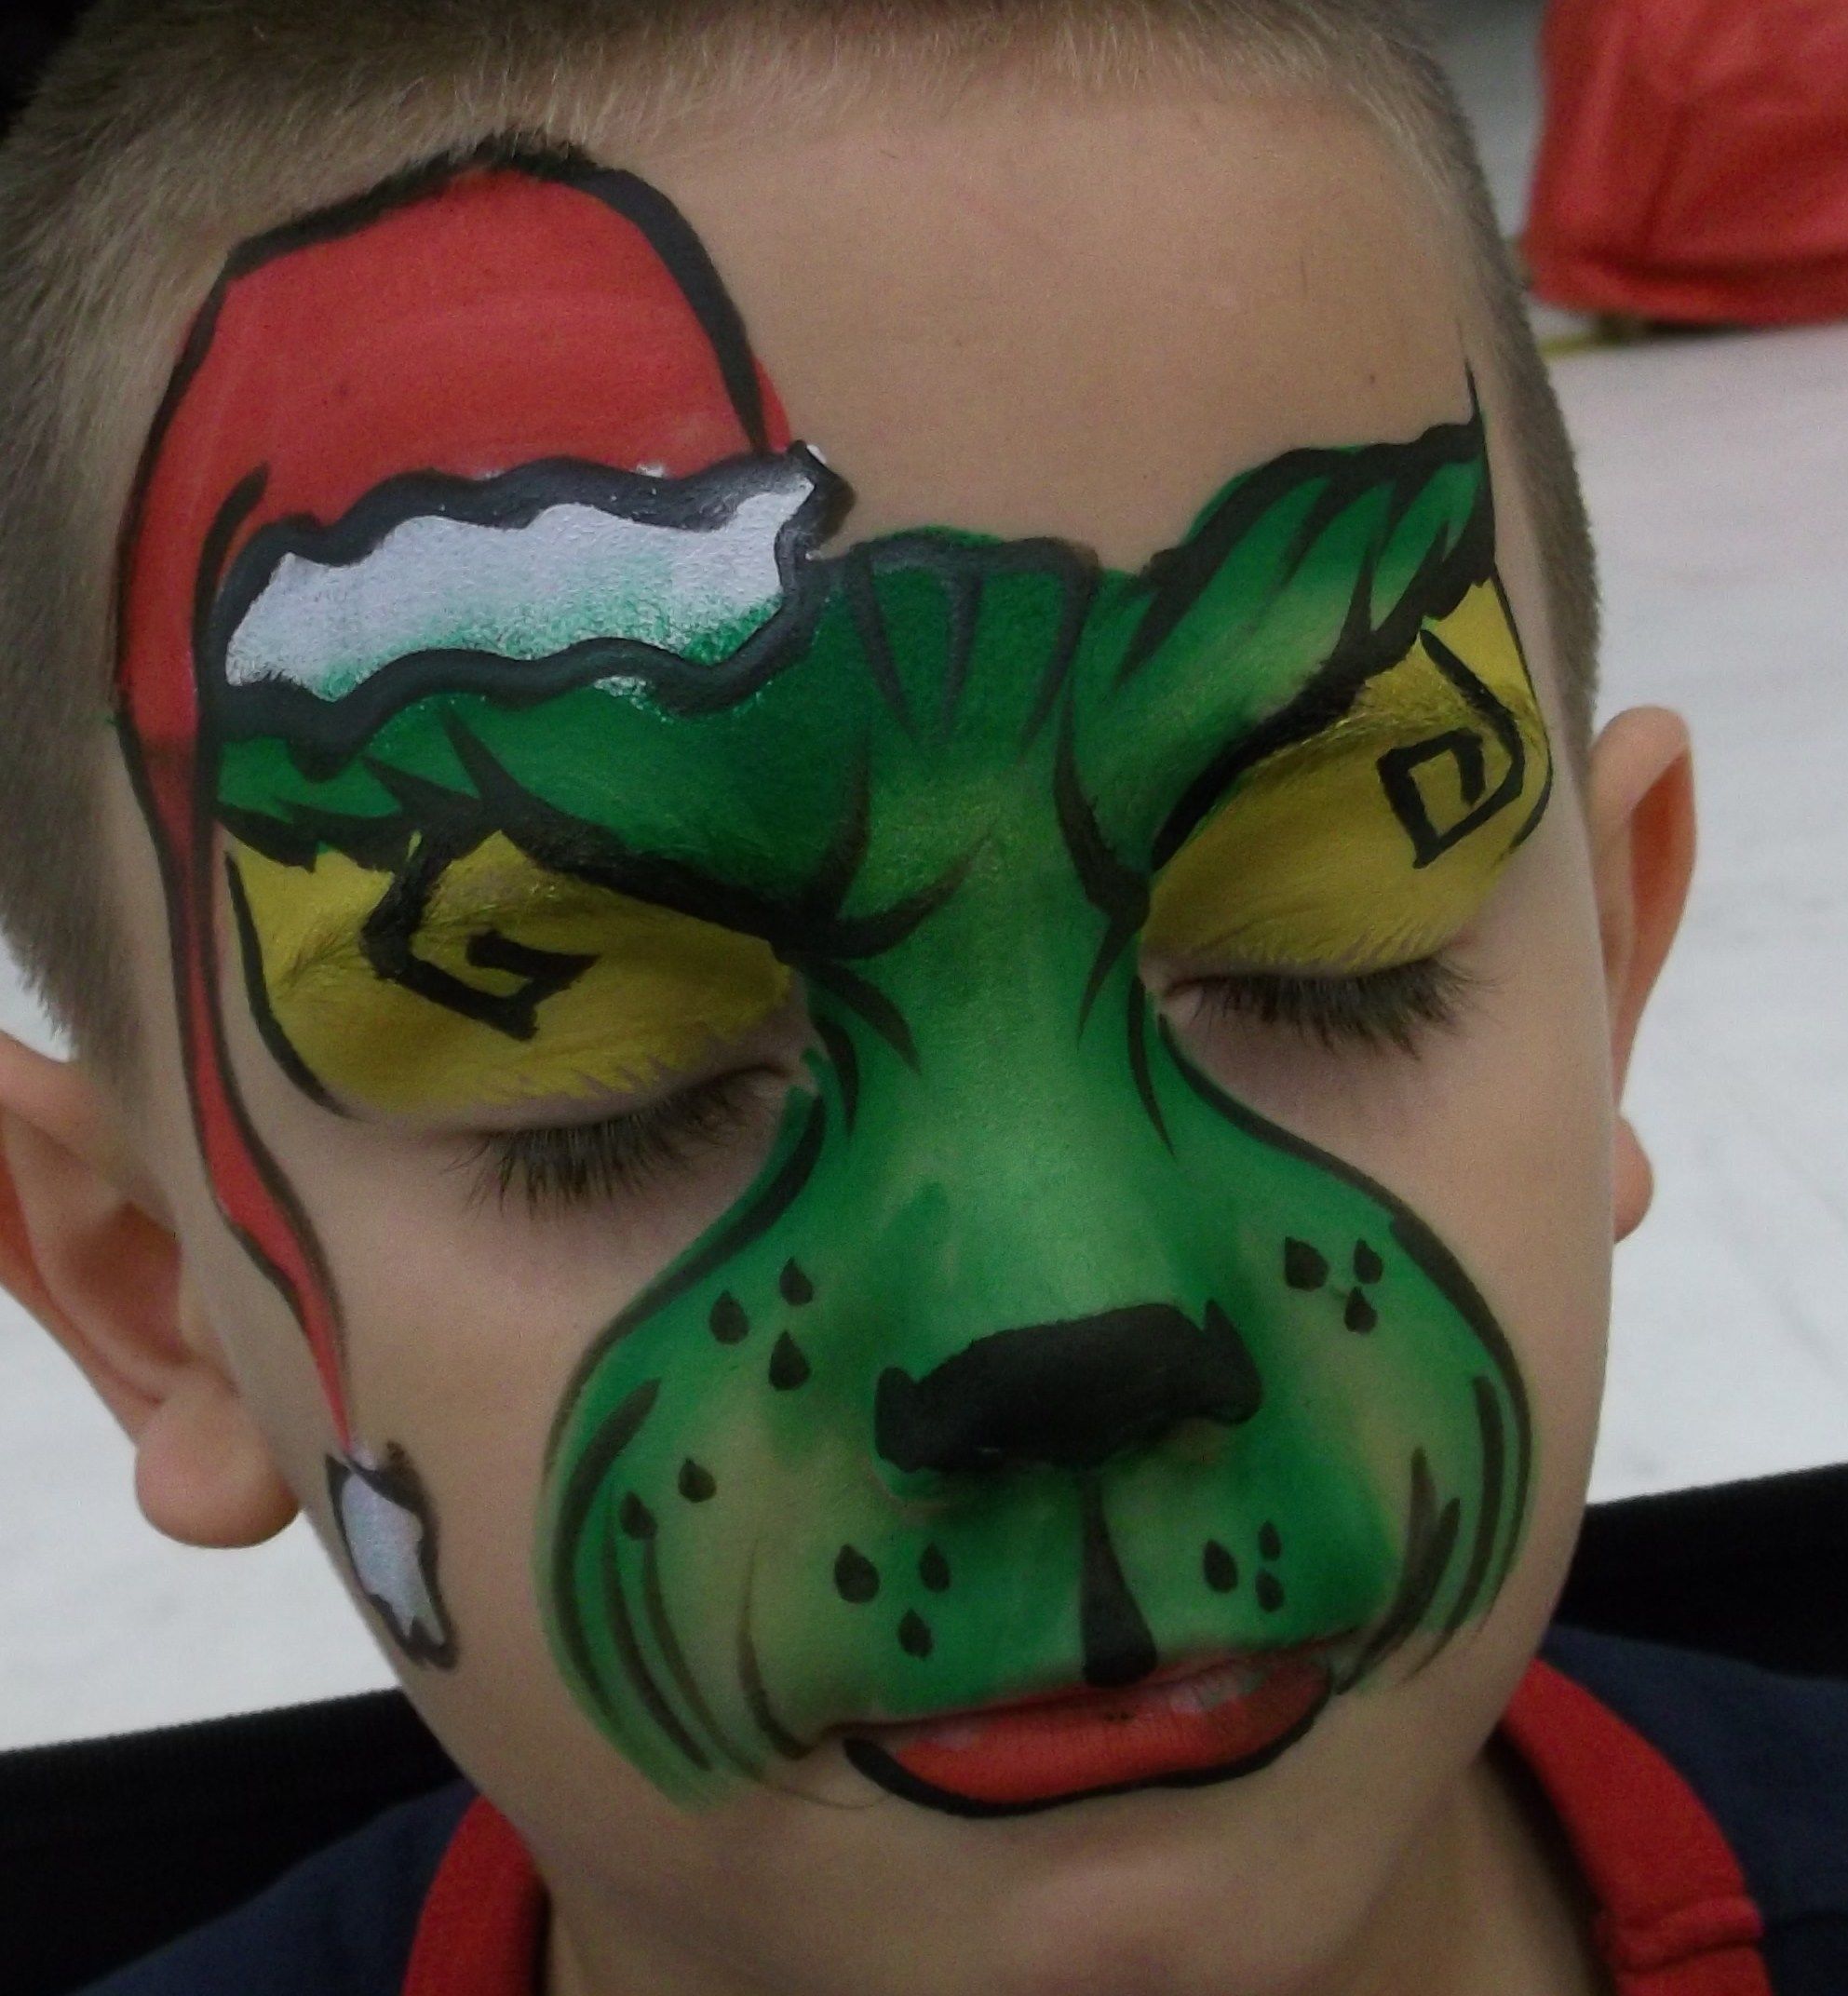 1985x2144 Christmas Face Painting, Paint Designs And Face - Grinch Face .....